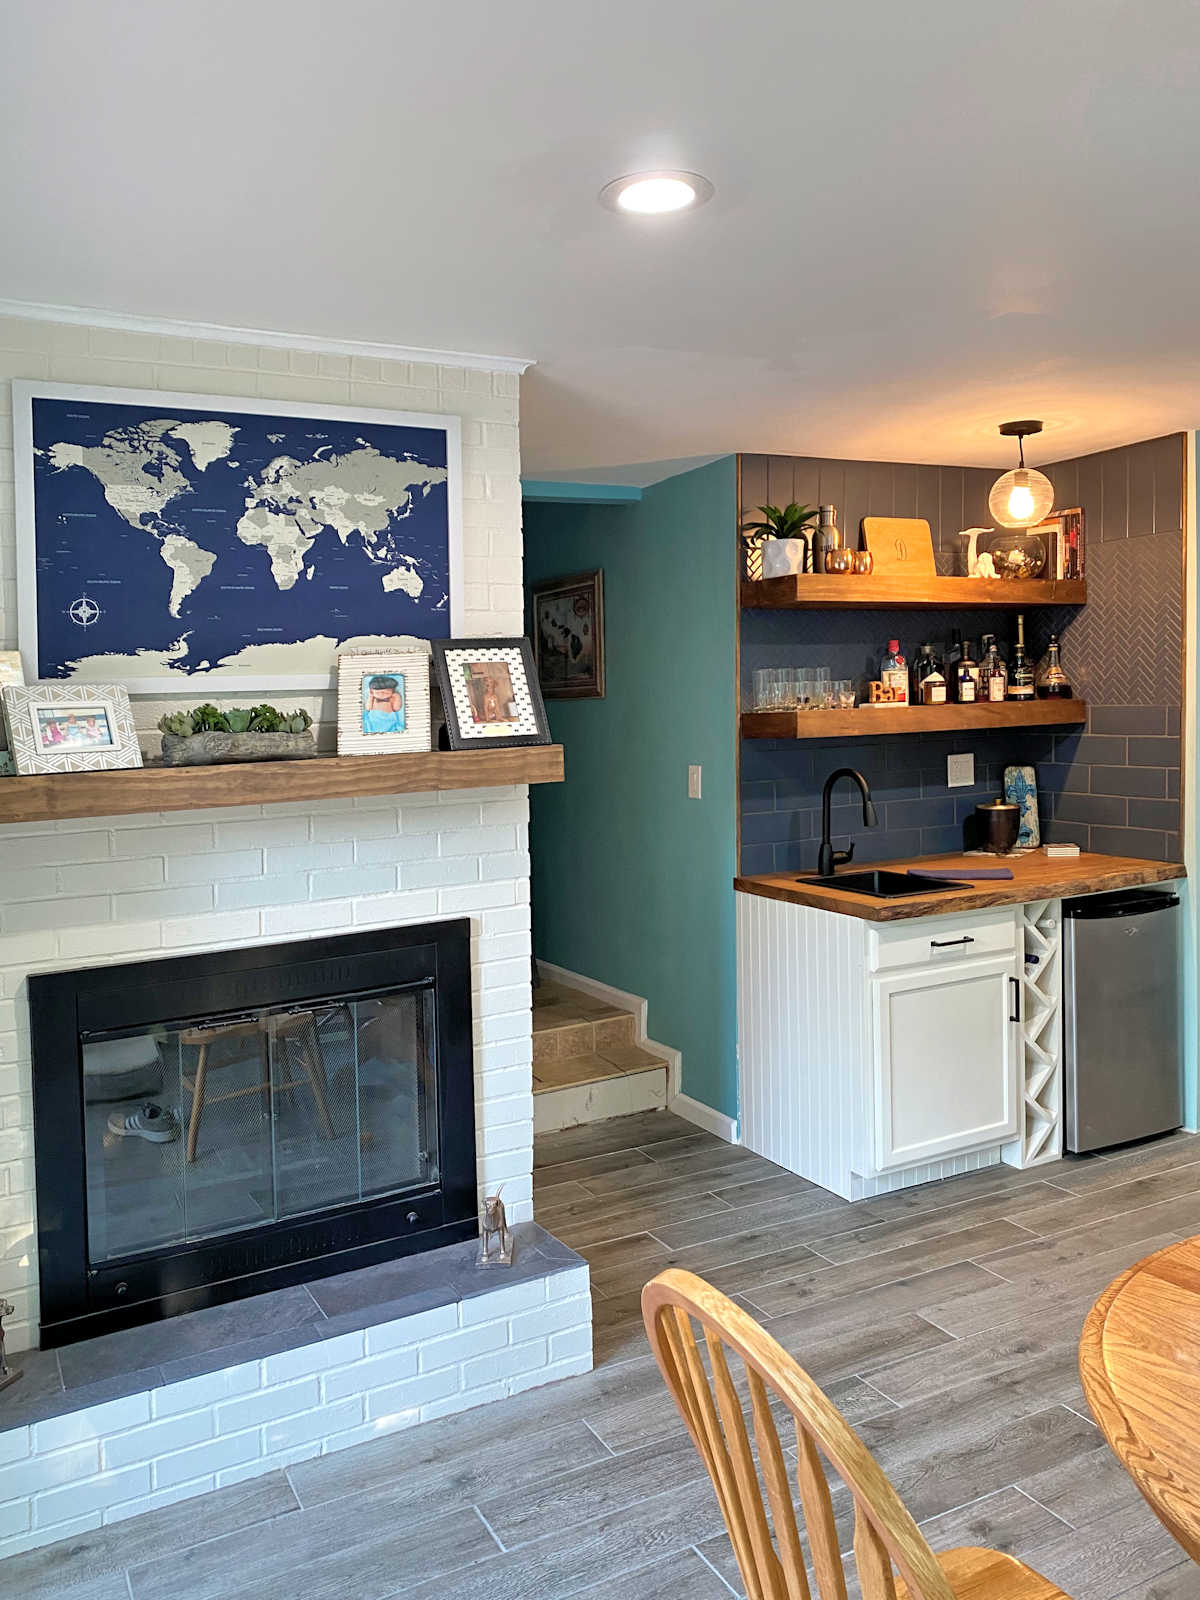 wet bar area in living room with live edge wood countertop, white cabinets, wood floating shelves, and dark blue tiles